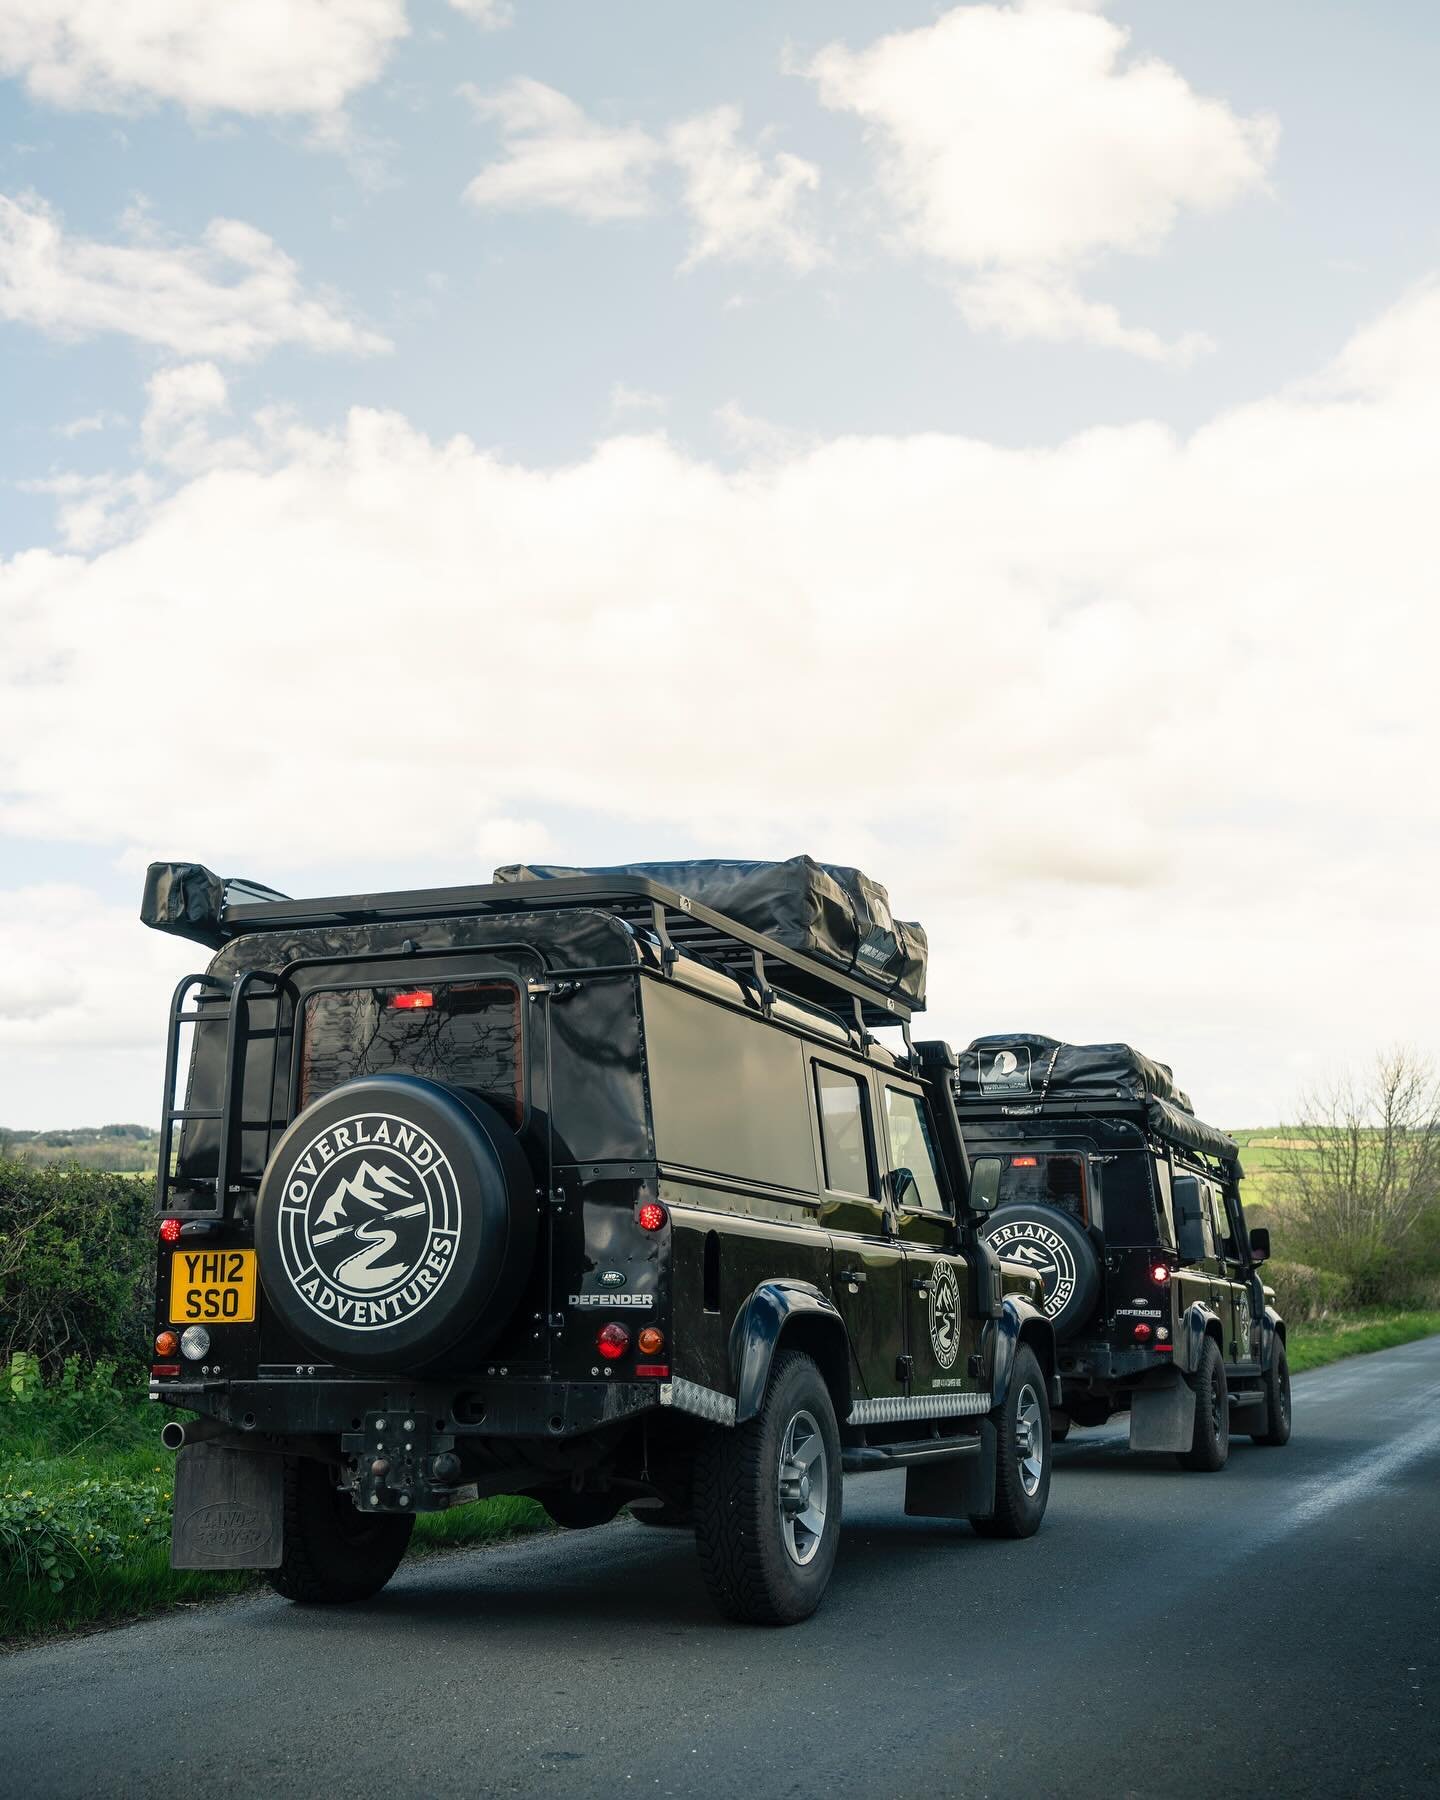 Great kit really does make all the difference 👌🏽

#roadtrippin #landroverdefender110 #adventuretravel #thetuscanway #landrovermagazine #offthegrid